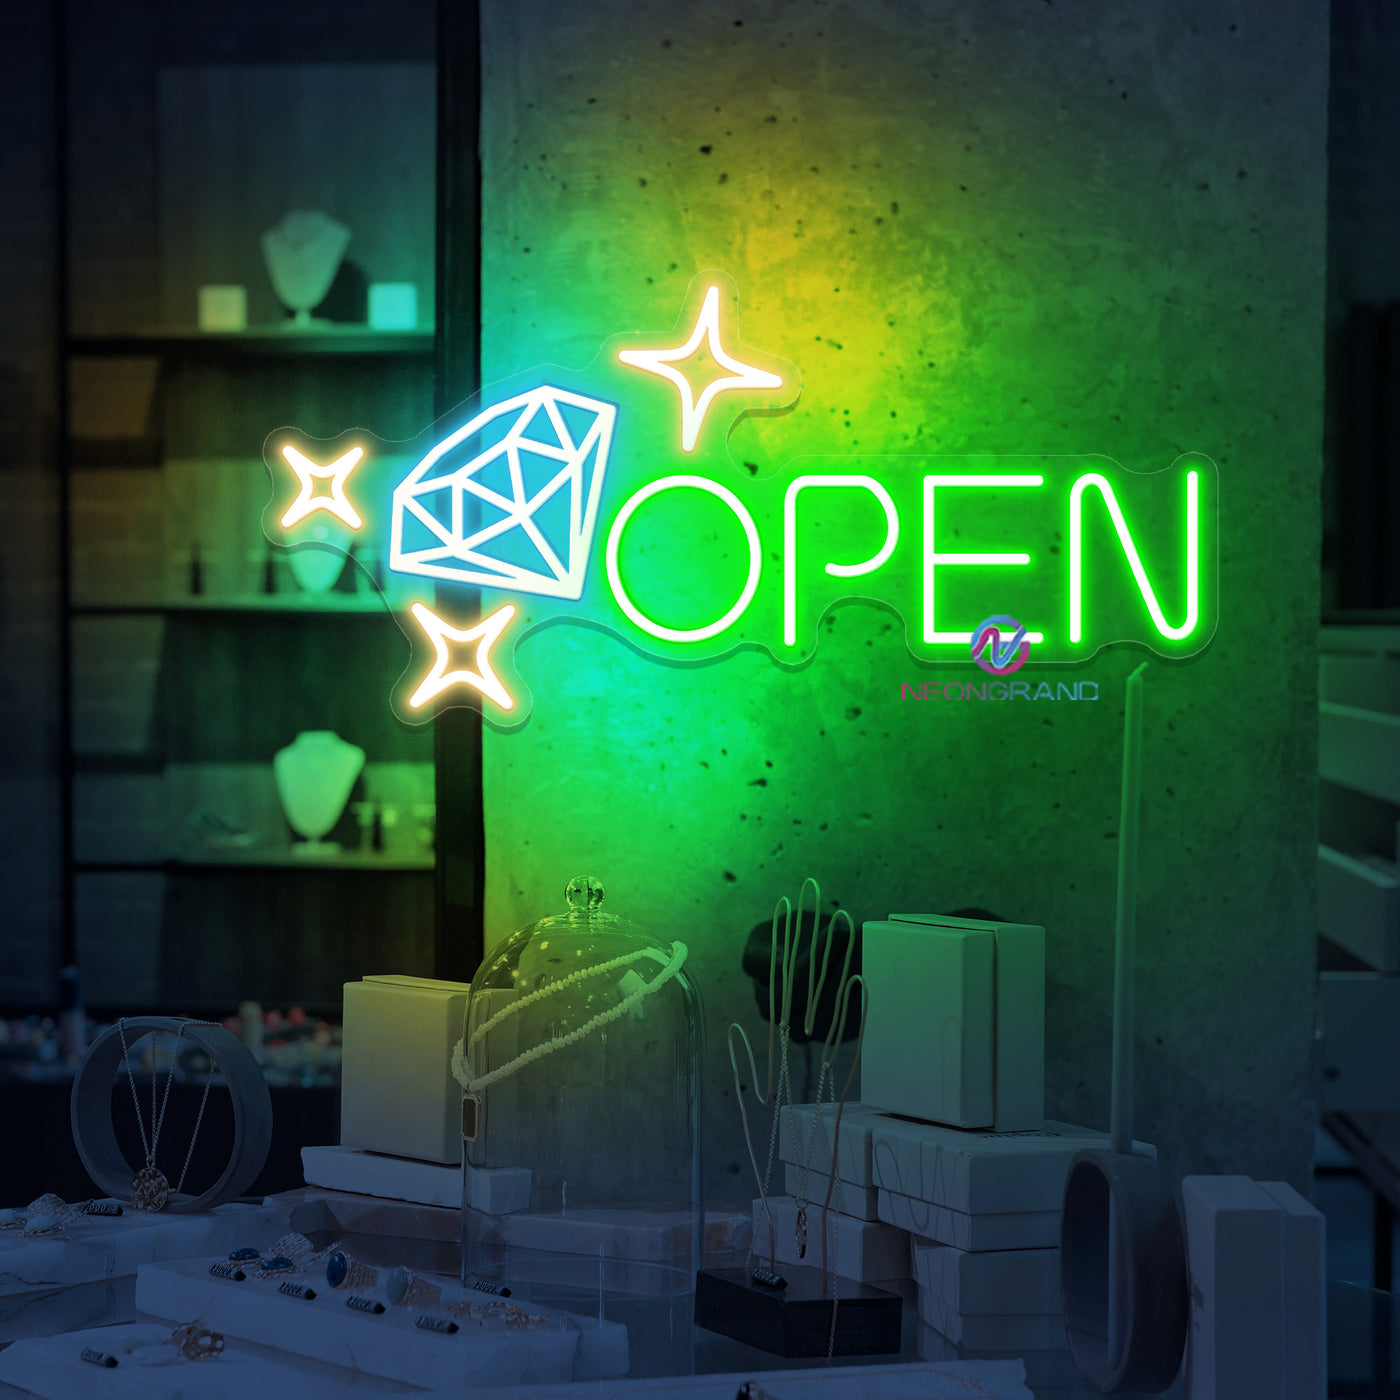 Neon Jewelry Stores Open Sign Business Led Light